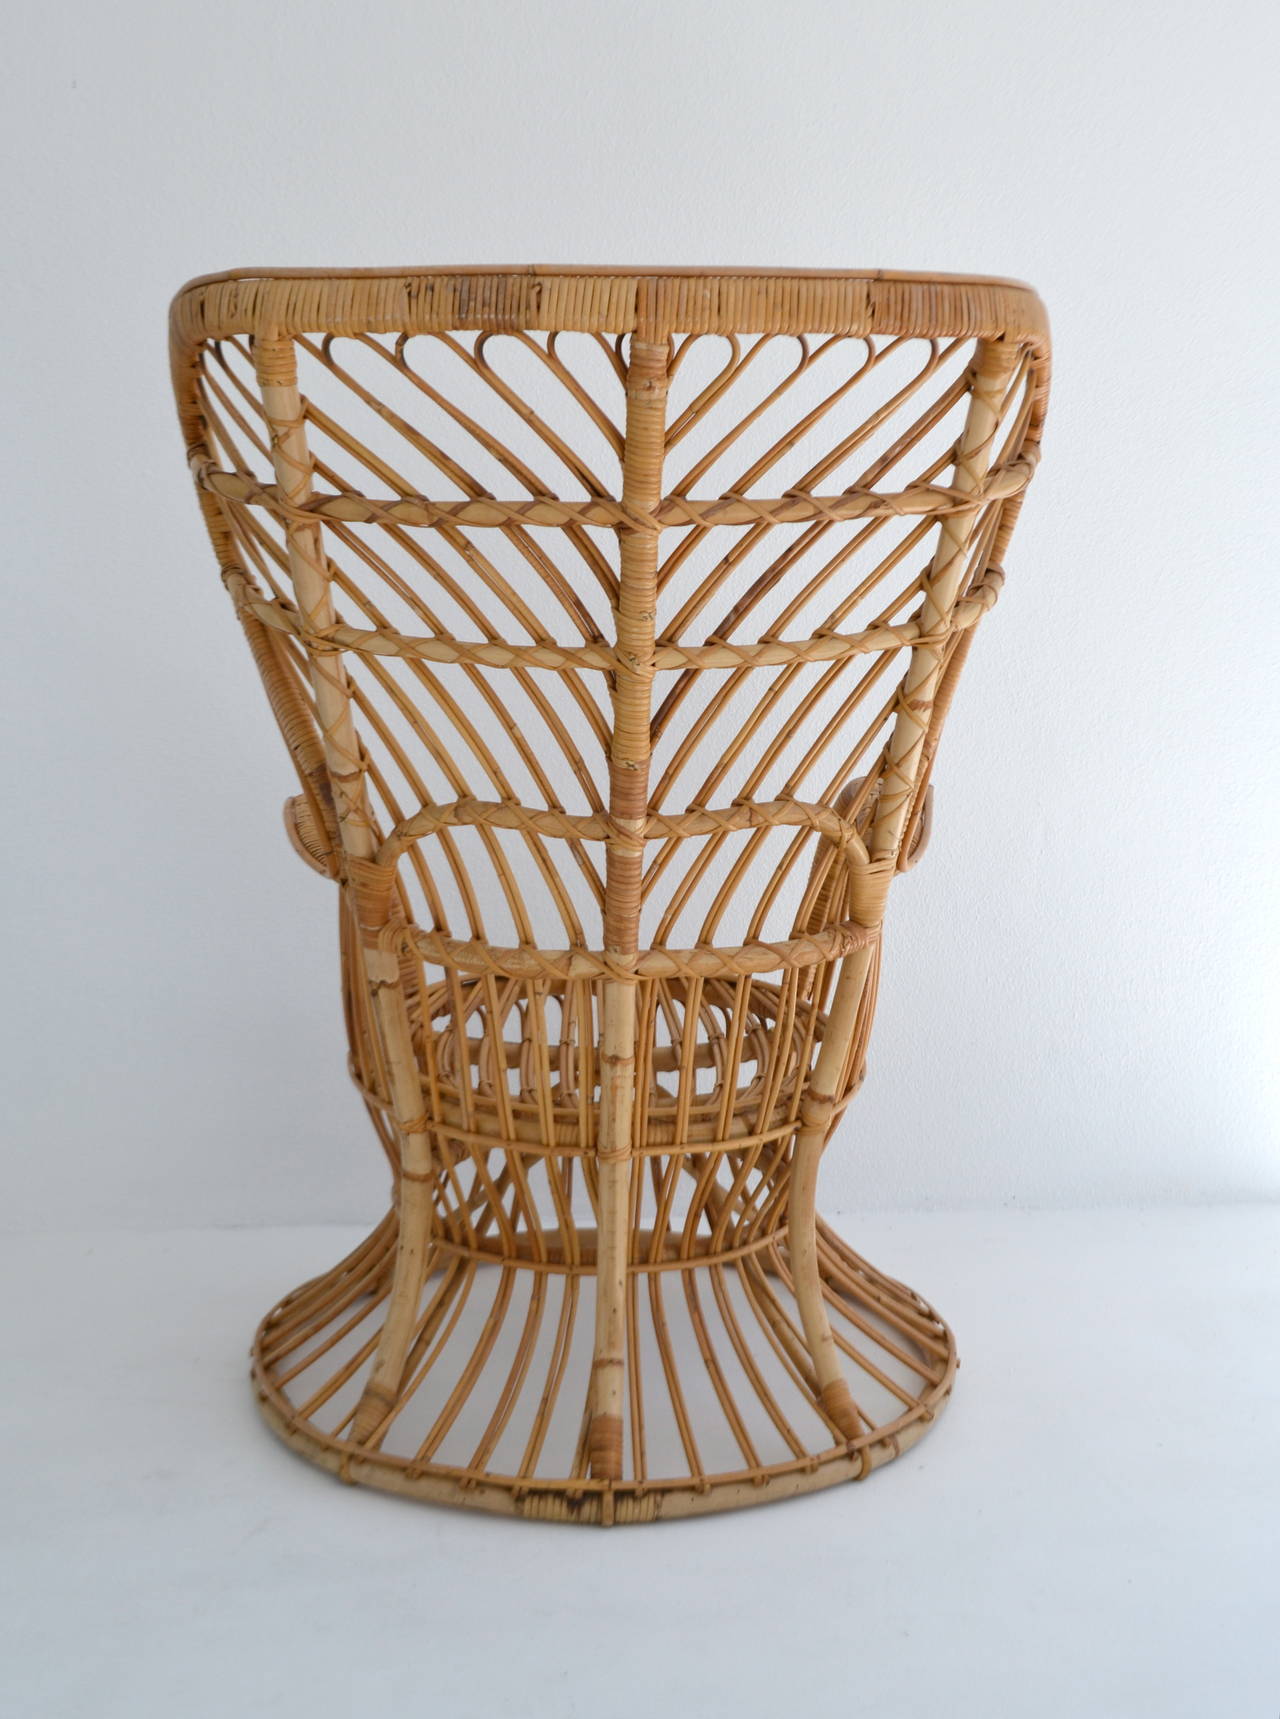 Woven Rattan and Bamboo Chair 2